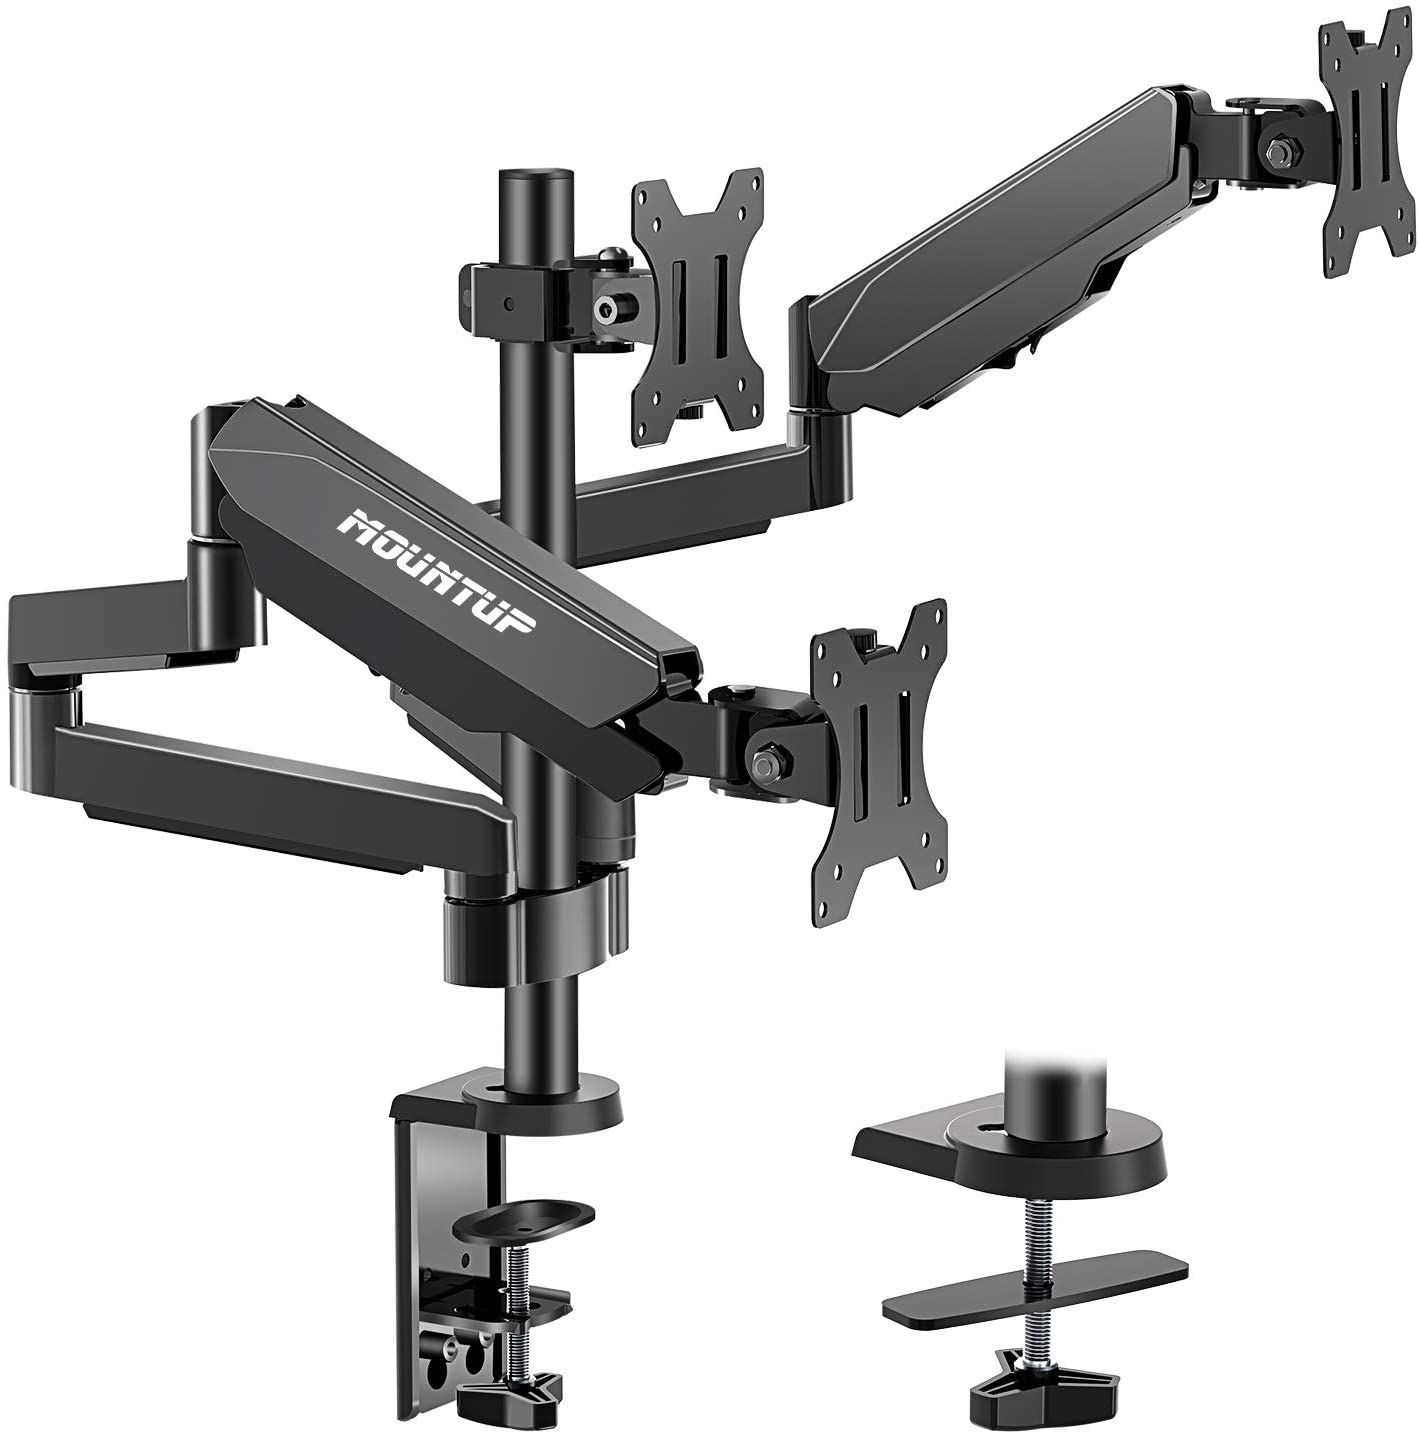 MOUNTUP Triple Monitor Stand Mount